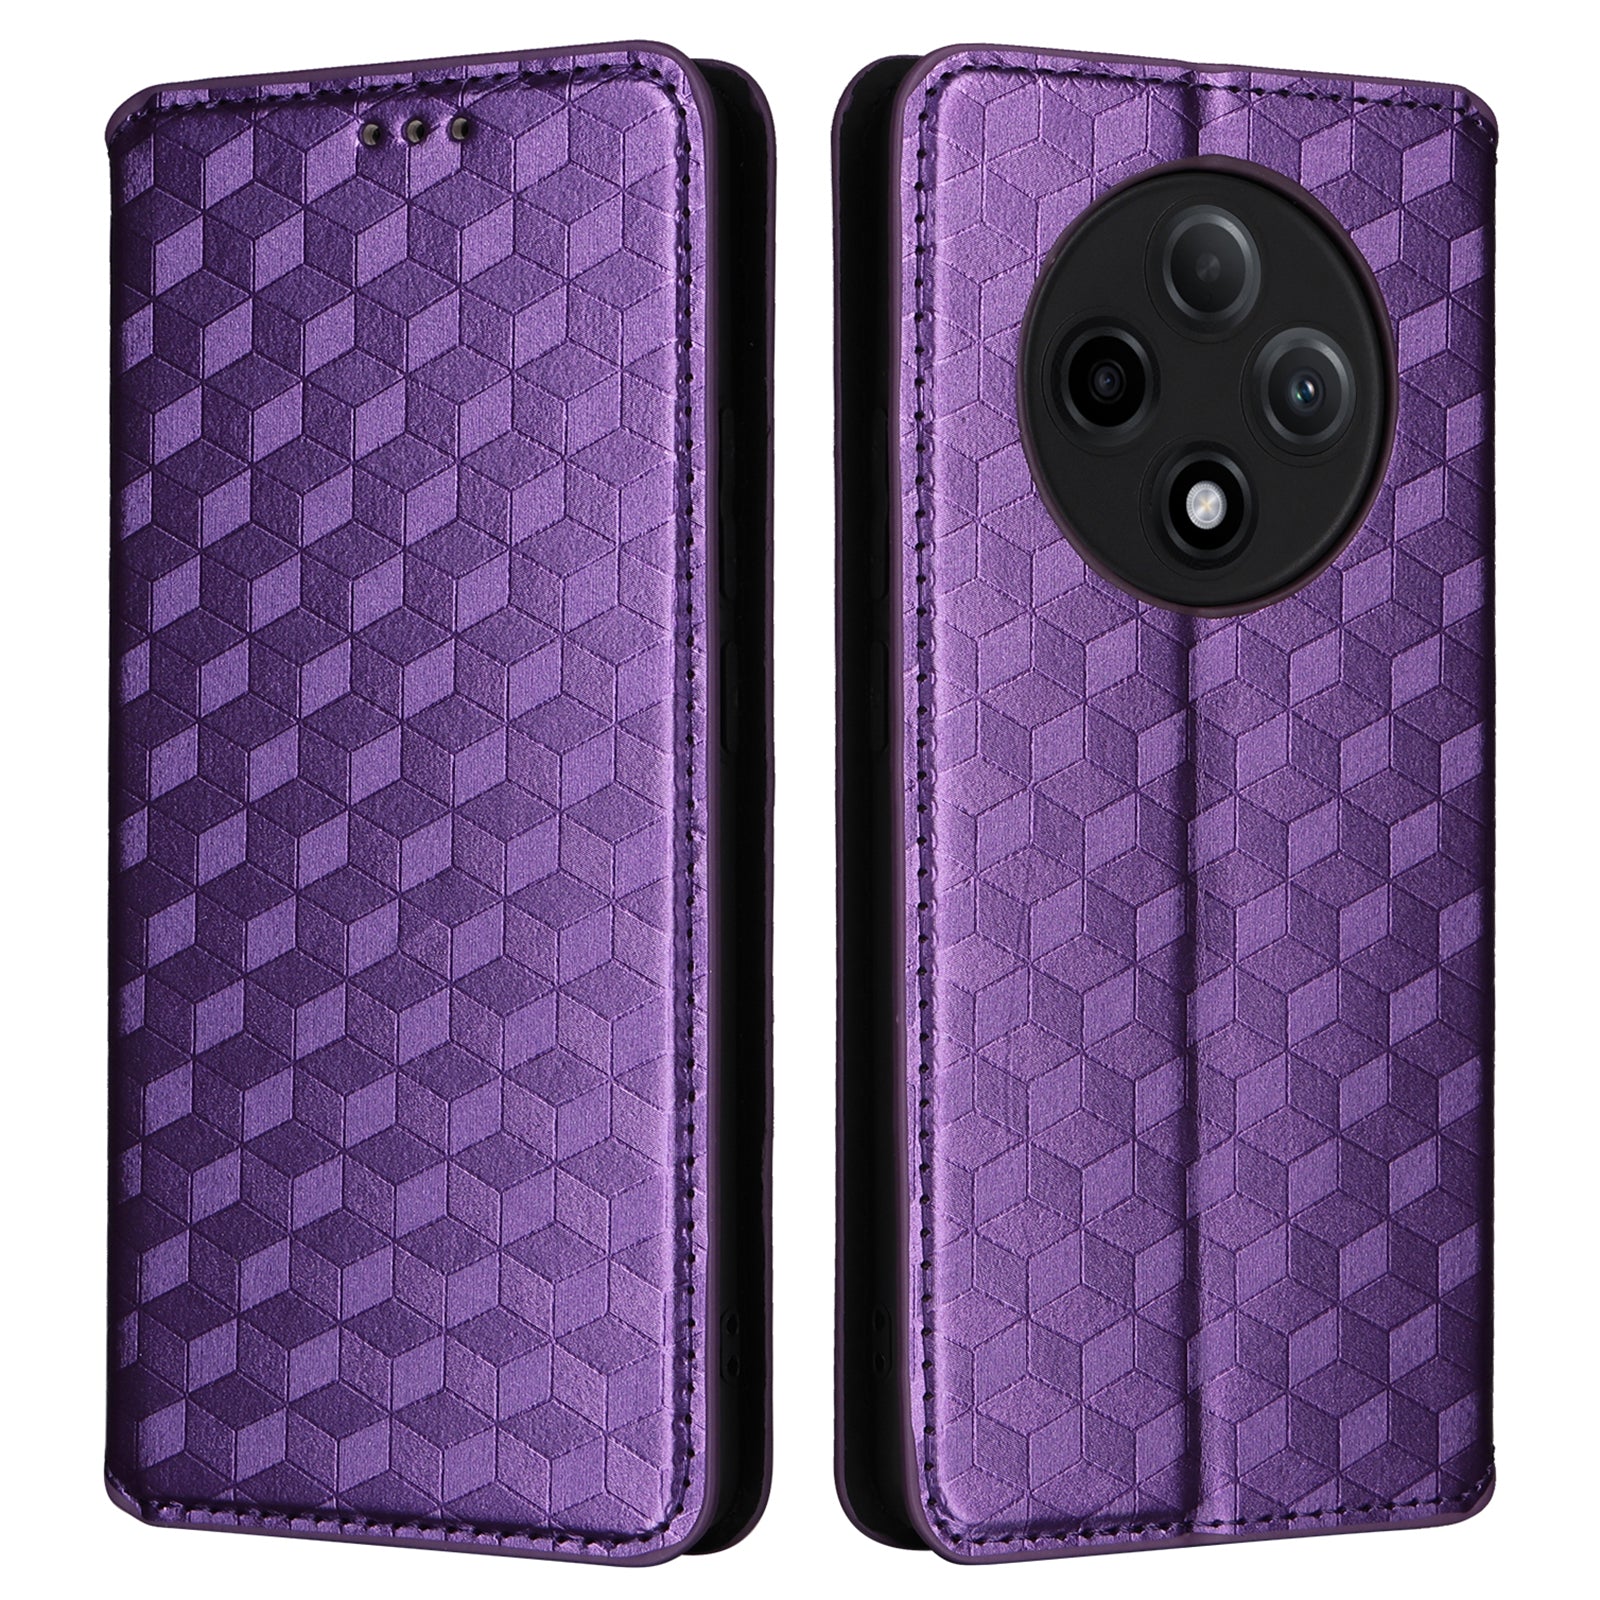 For Oppo A3 Pro 5G Leather Wallet Flip Cover Mobile Phone Case Wholesale - Purple